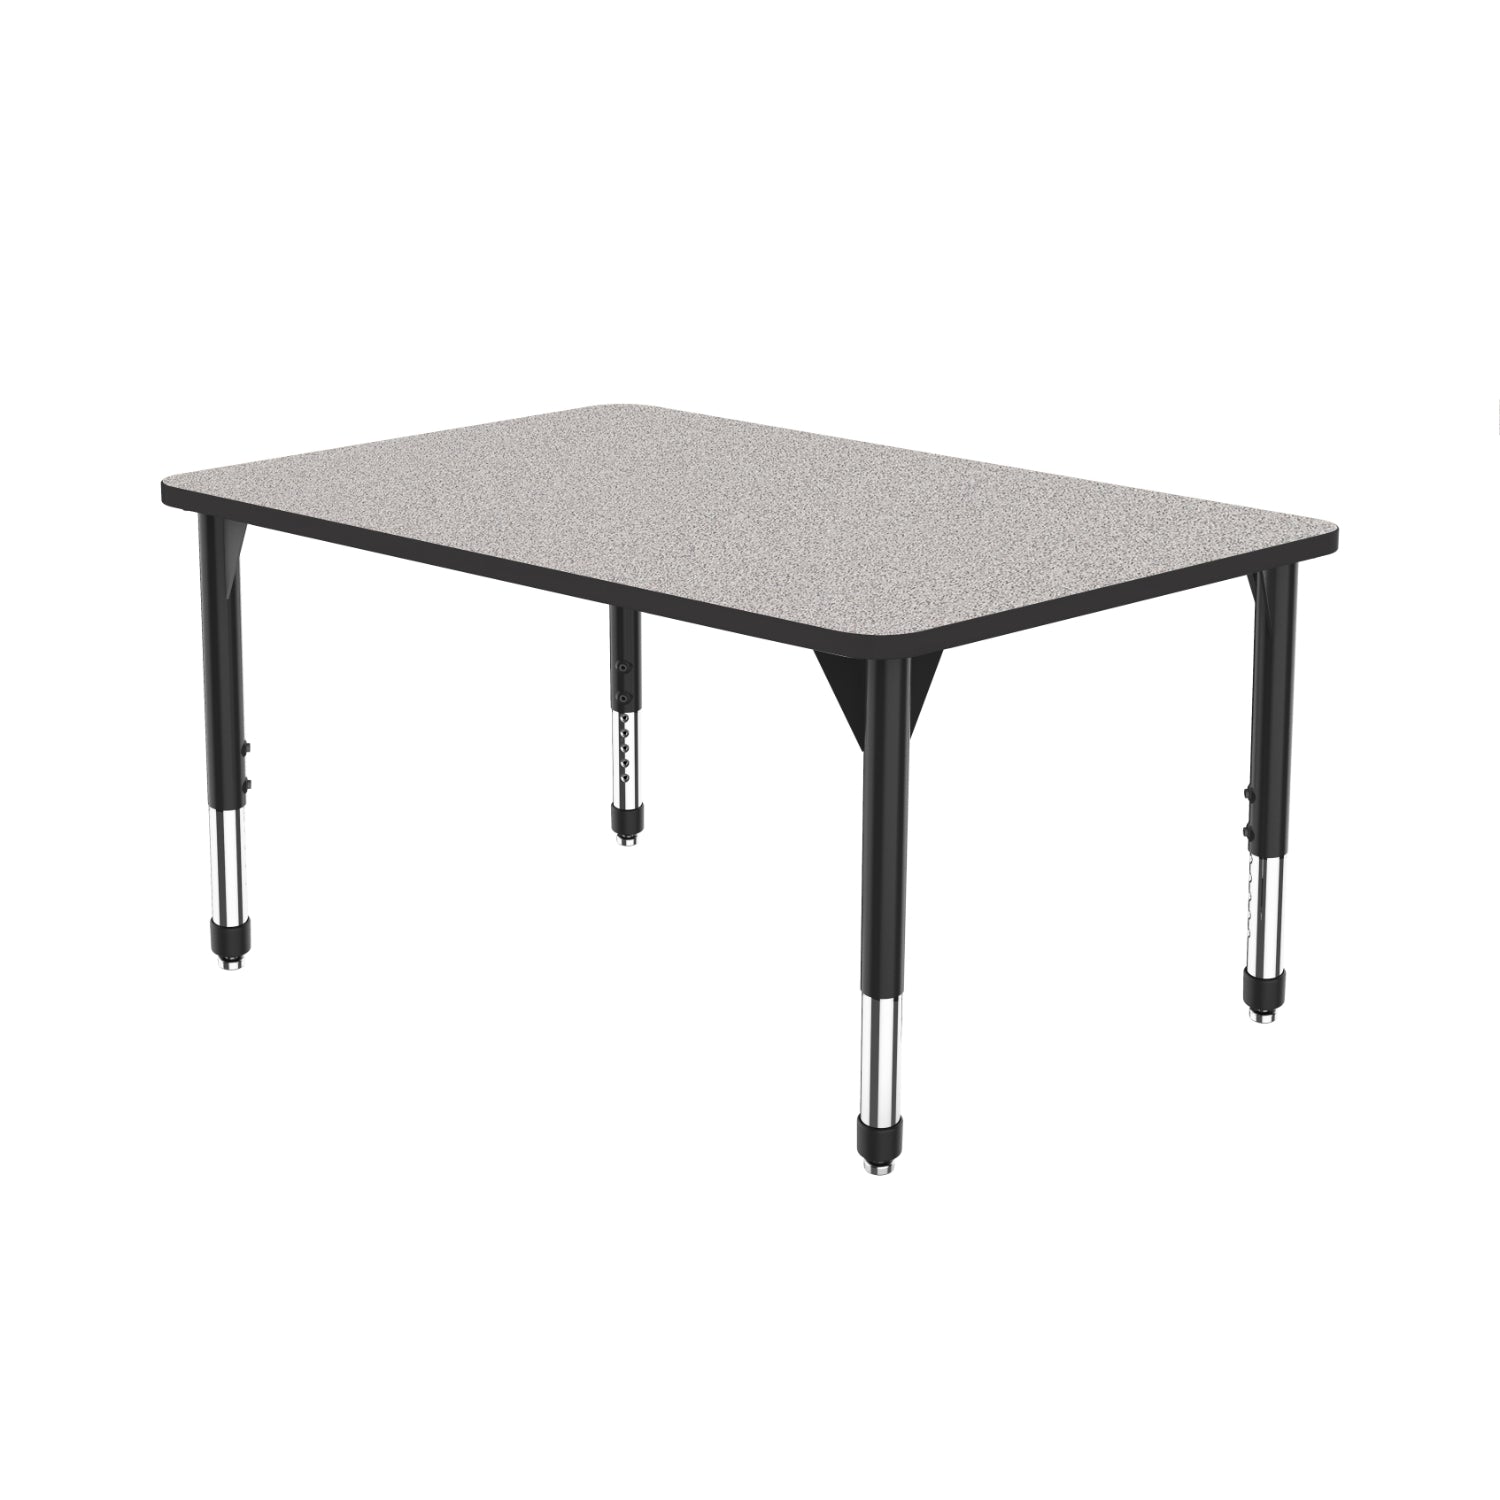 Premier Standing Height Collaborative Classroom Table, 36" x 54" Rectangle